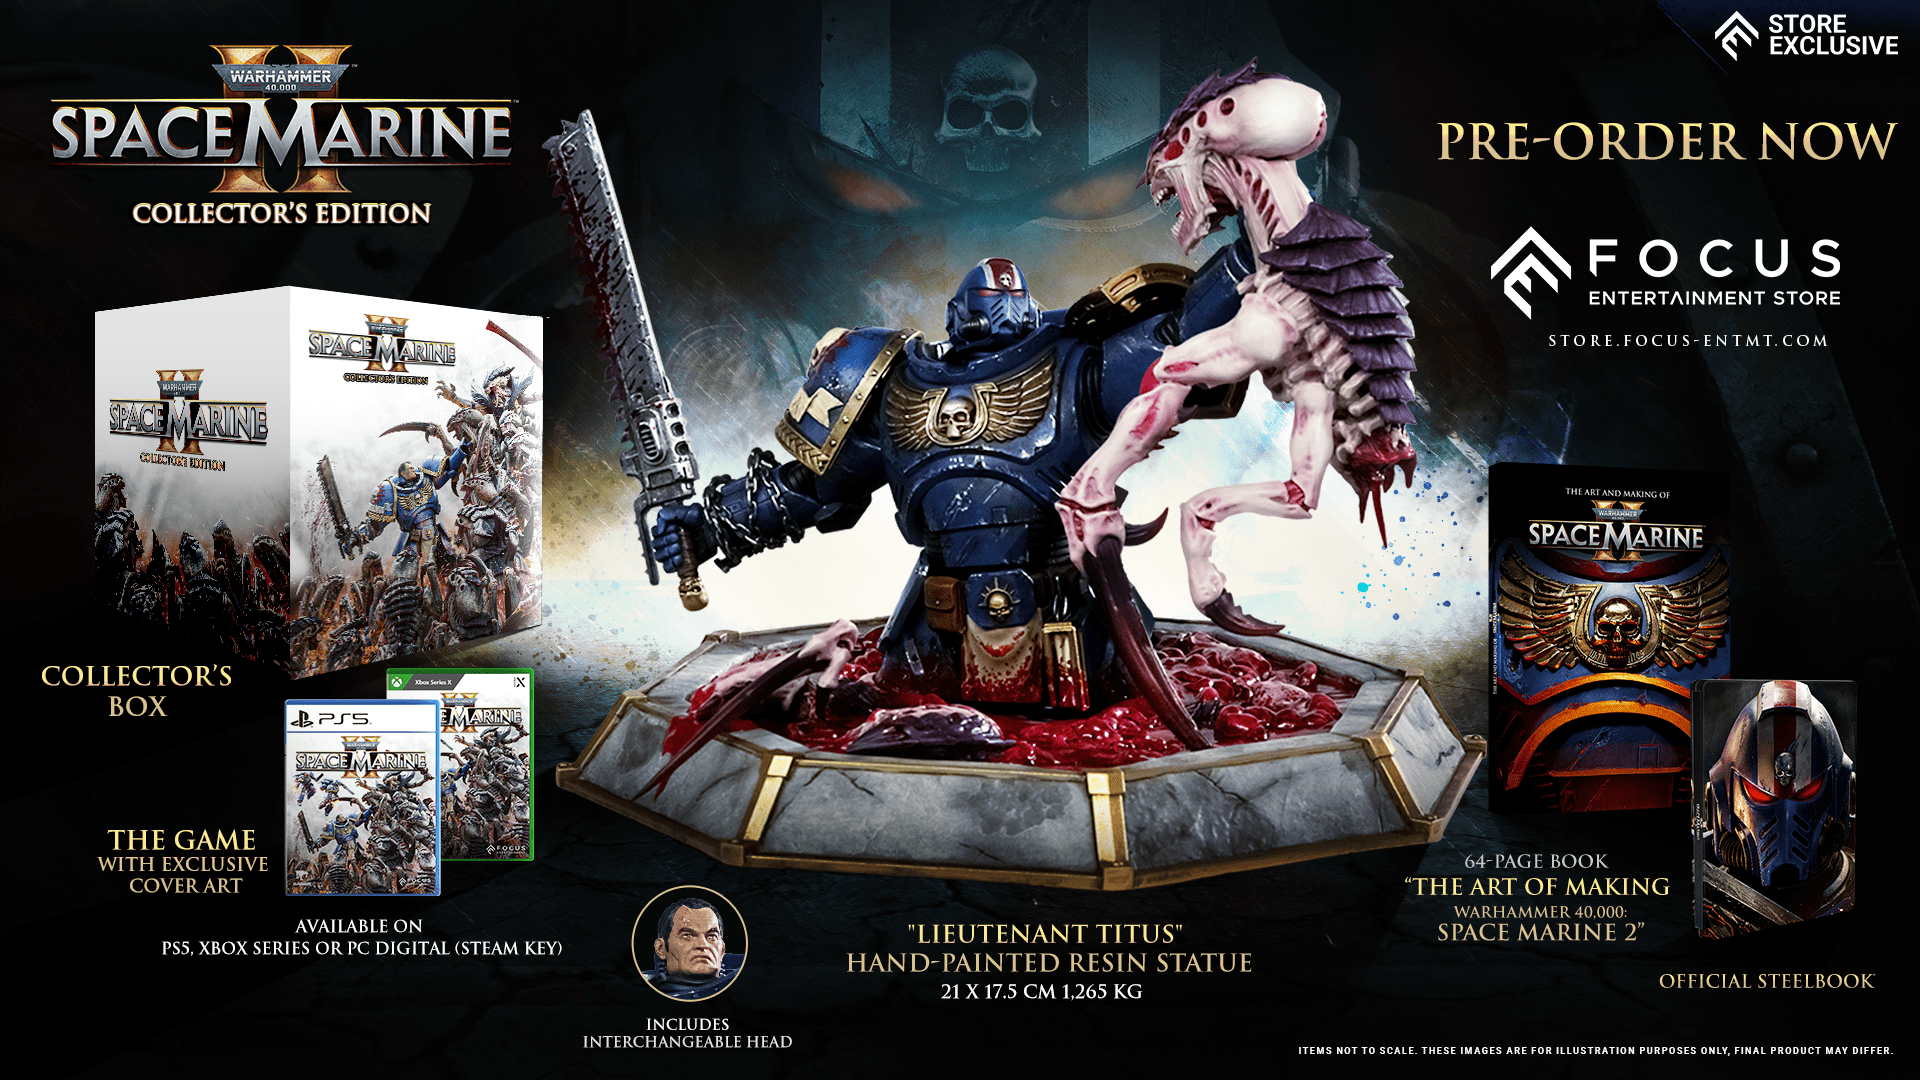 Space Marine 2 collector's edition